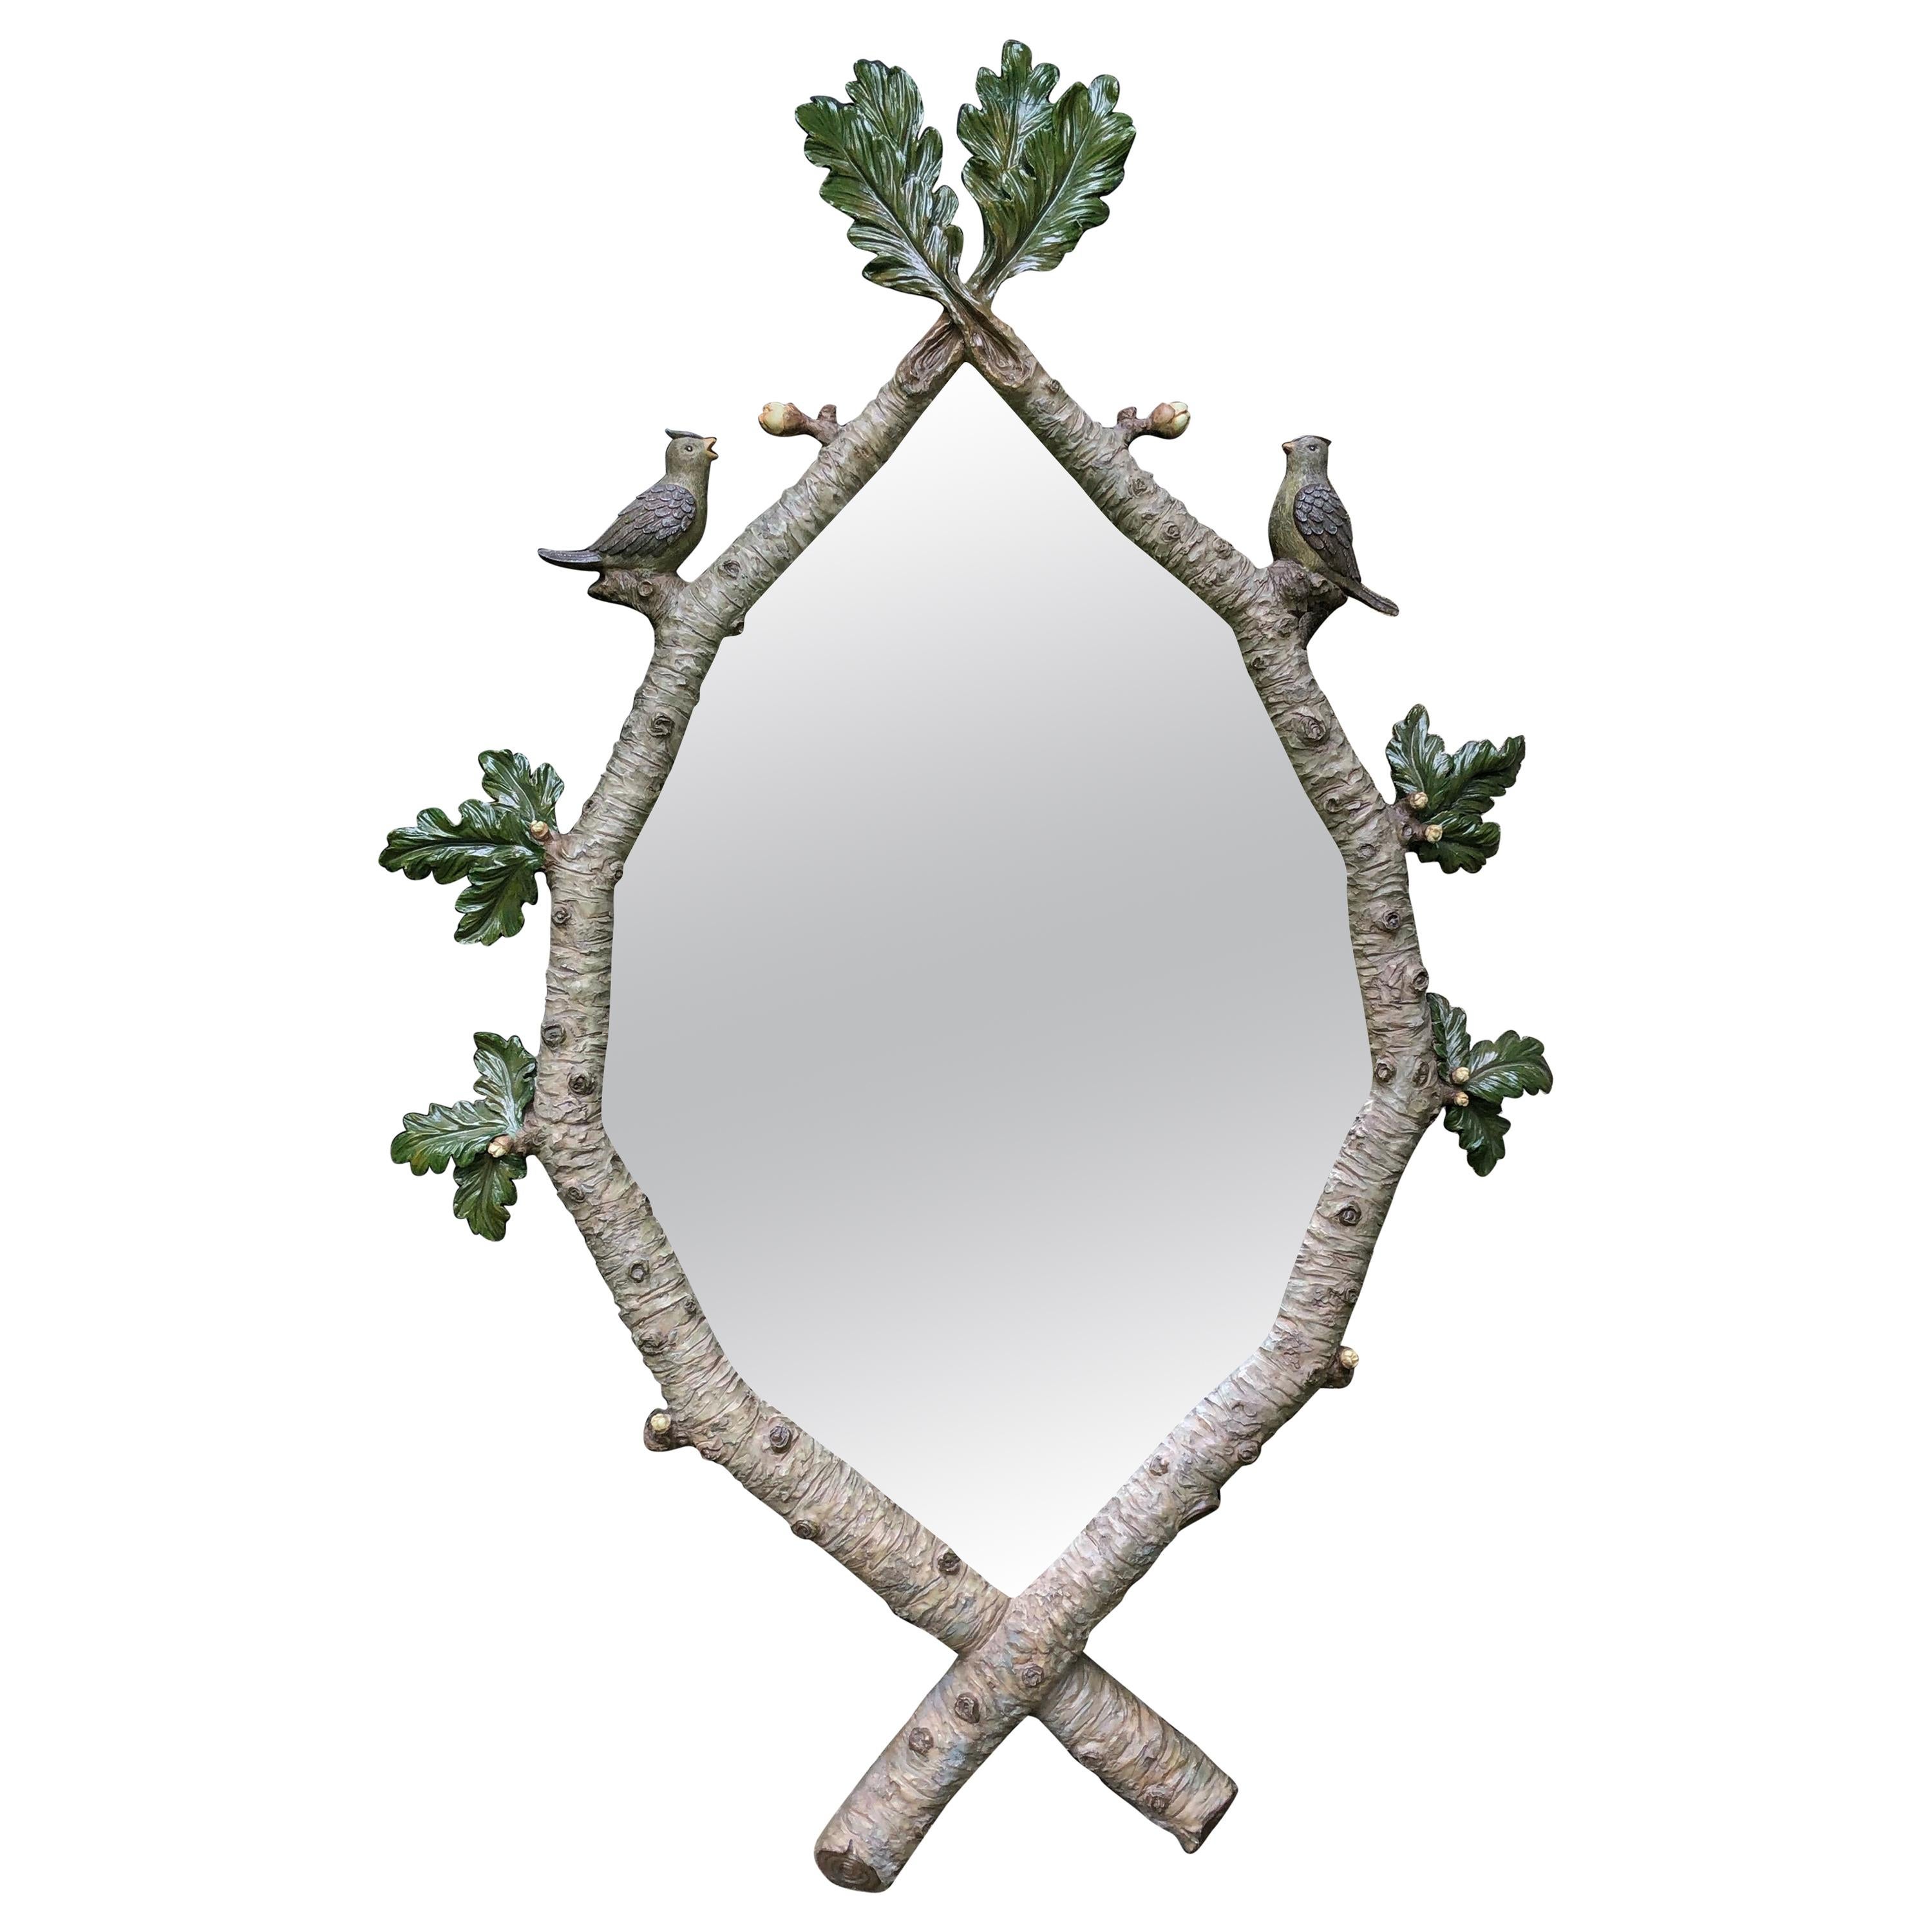 Monumental Statement Piece Magical Faux Bois Mirror with Birds & Leaves